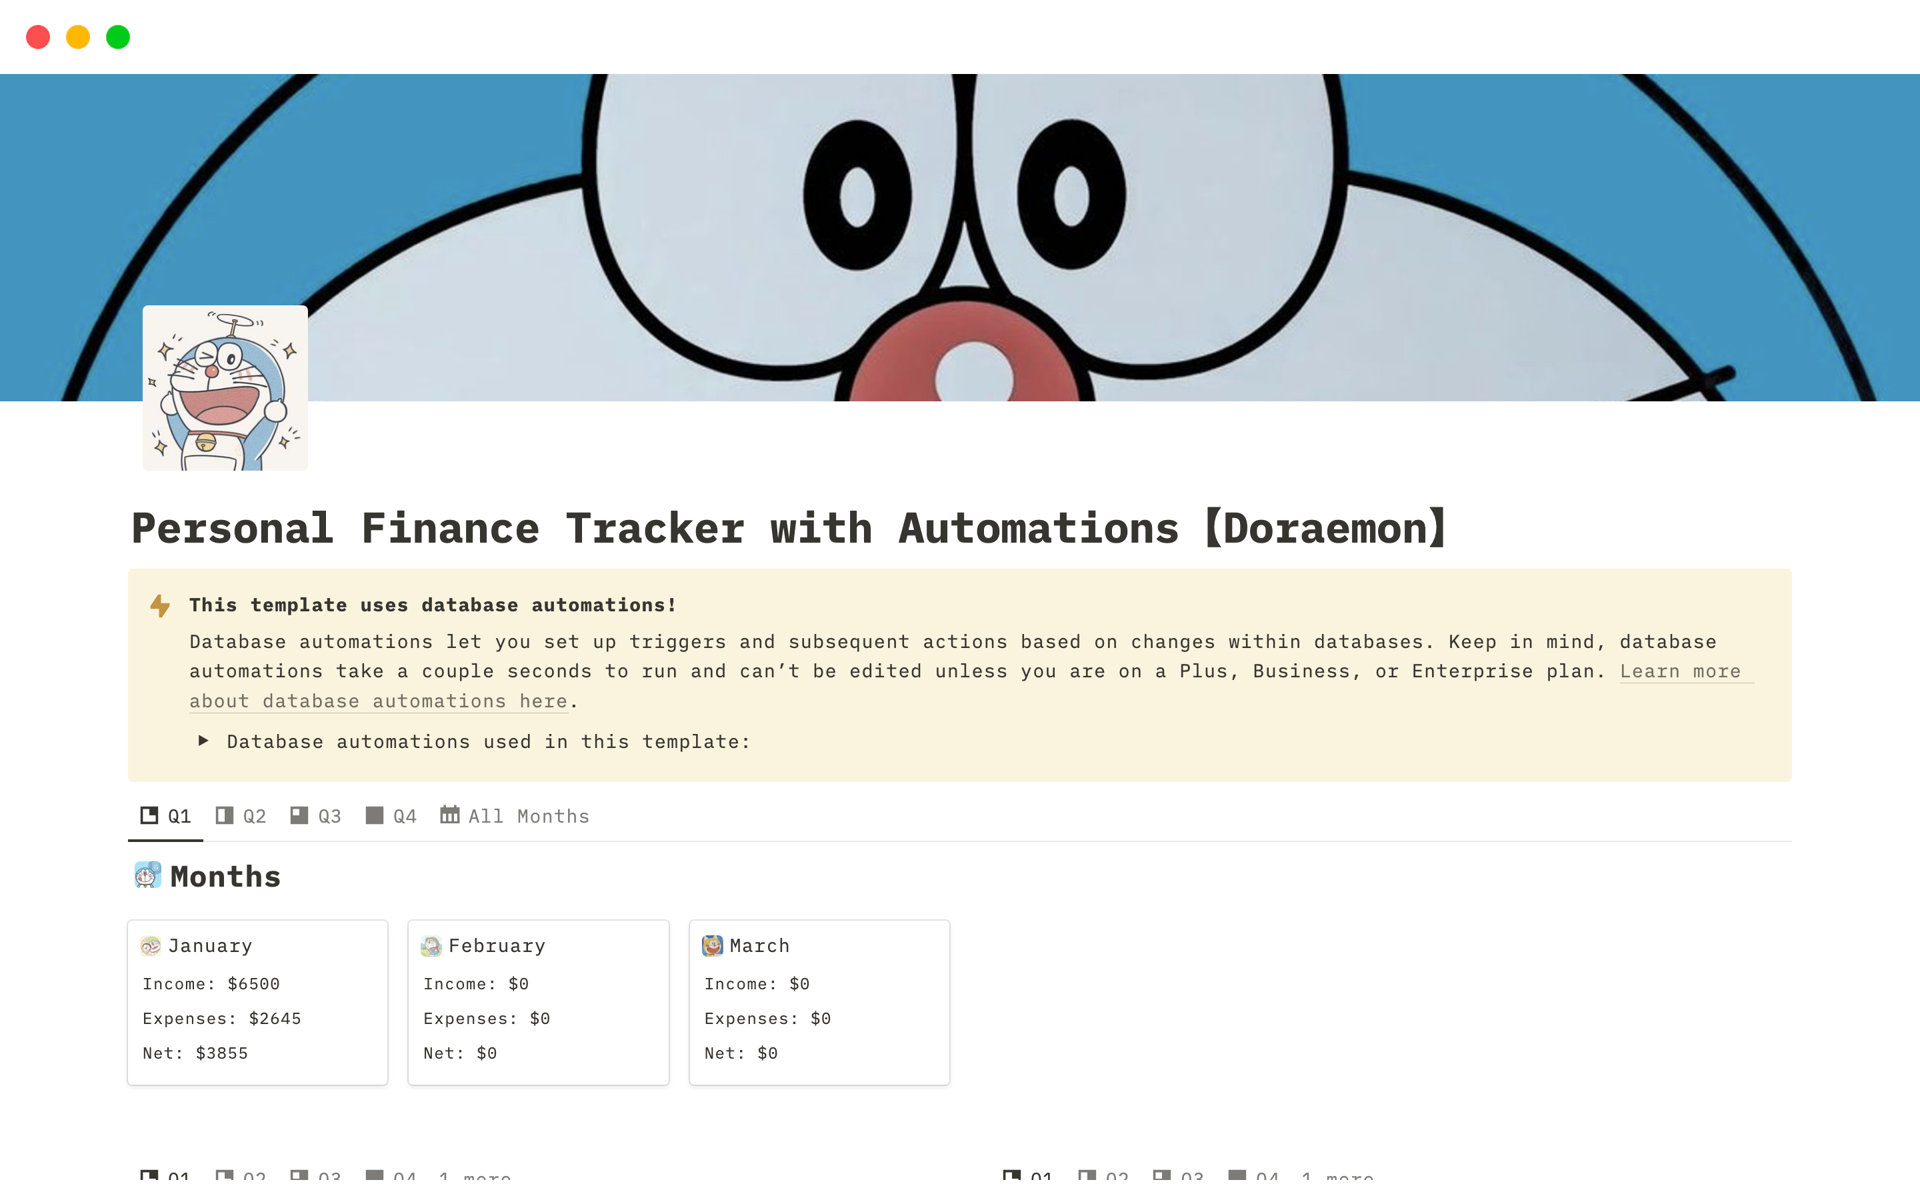 Personal Finance Tracker with Automations 【Doraemon】 provides a delightful and efficient solution for effortlessly tracking your daily finances. 